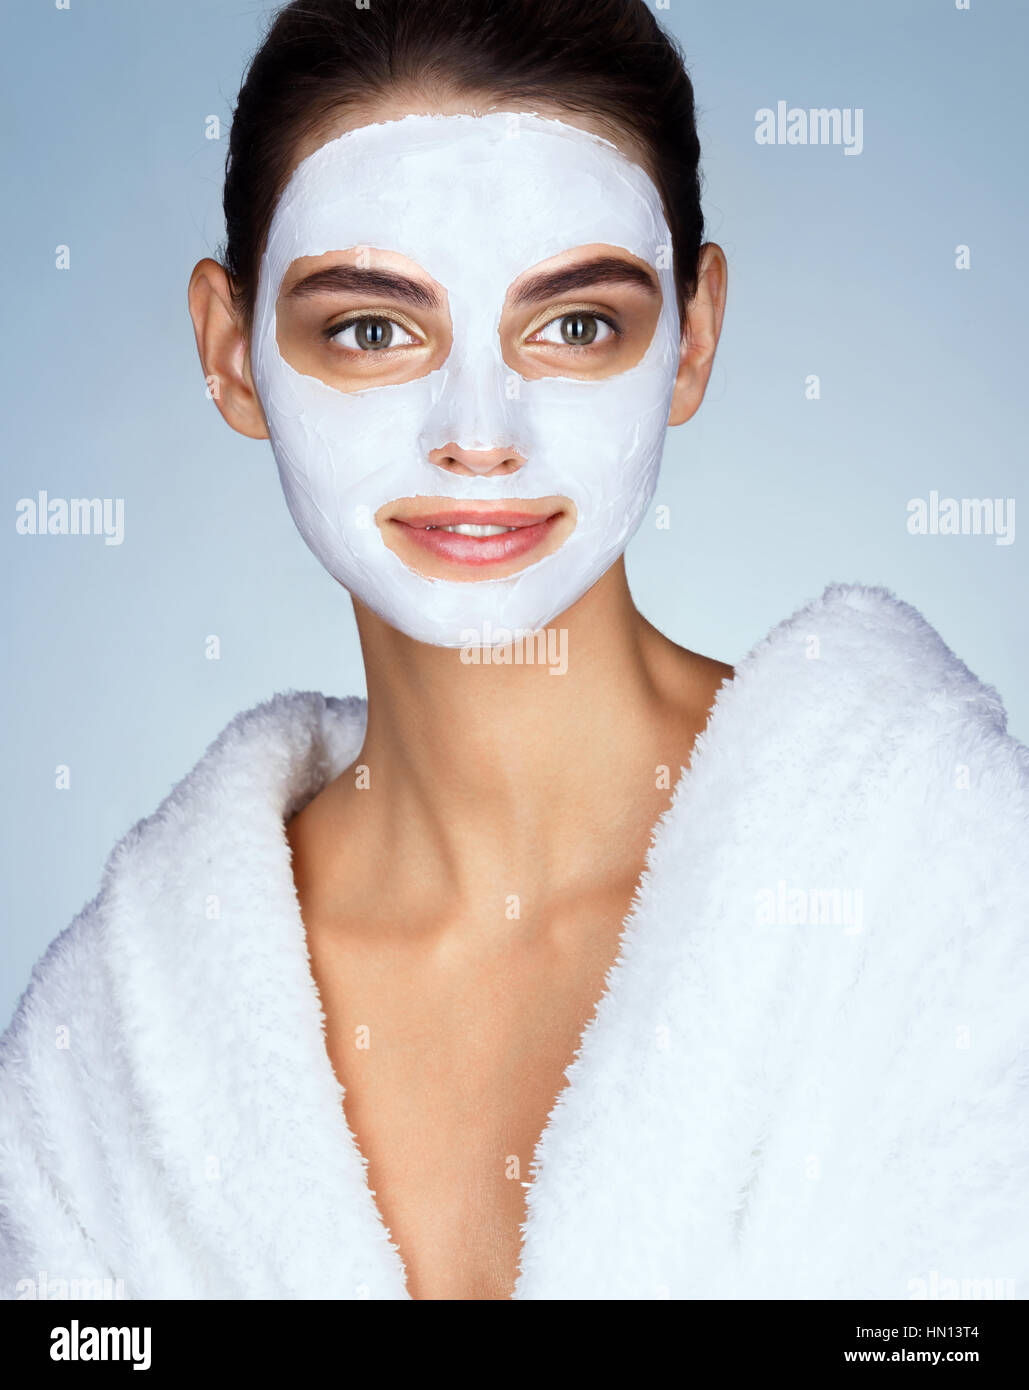 Smiling woman with moisturizing facial mask. Photo of brunette woman wearing white bathrobe. Beauty & Skin care concept Stock Photo